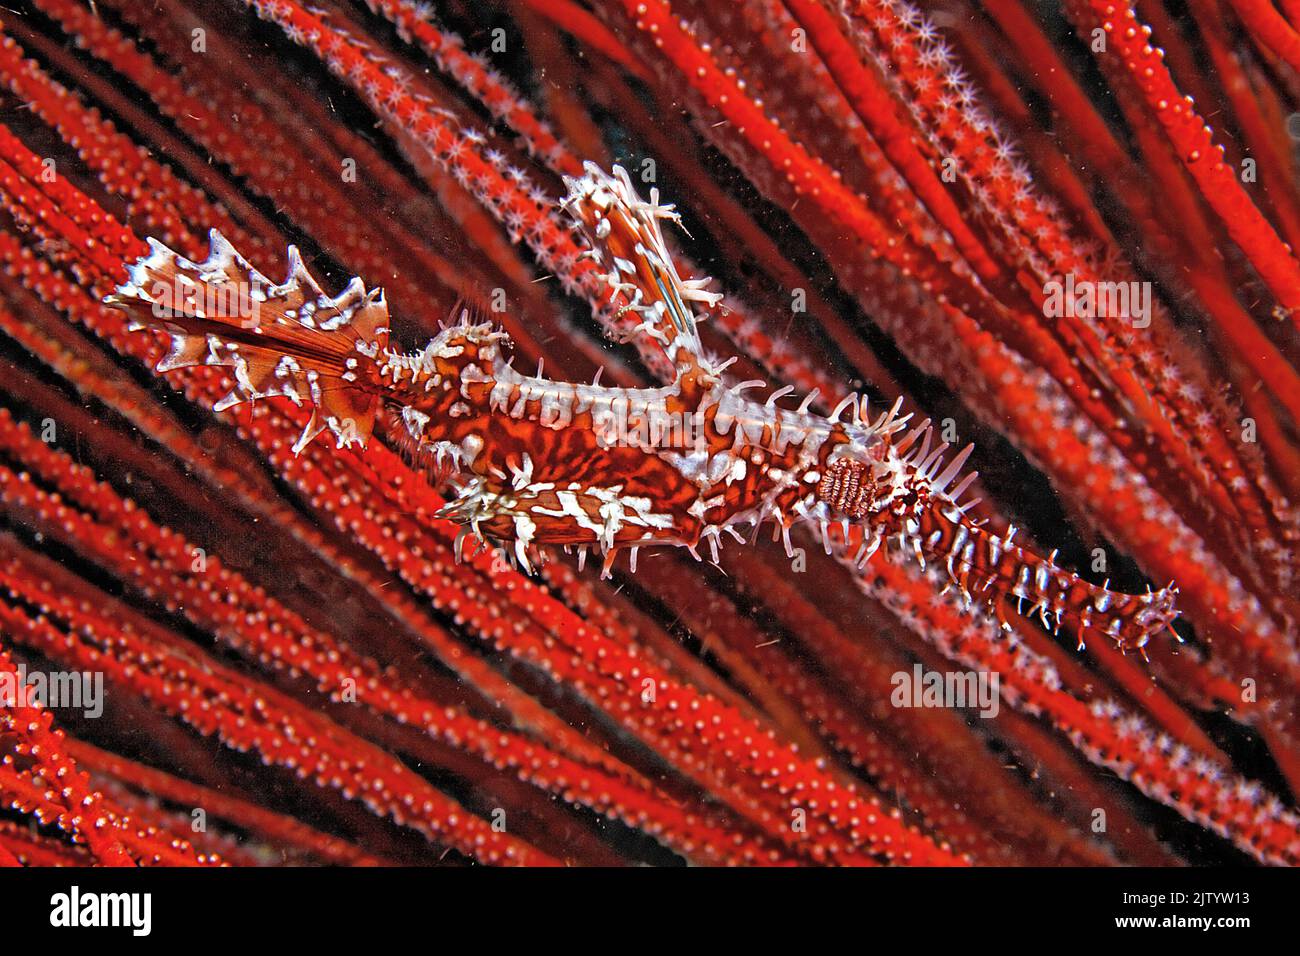 Ornate ghost pipefish or Harlequin ghost pipefish (Solenostomus paradoxus), at a red horn coral, Ari Atoll, Maldives, Indian Ocean, Asia Stock Photo